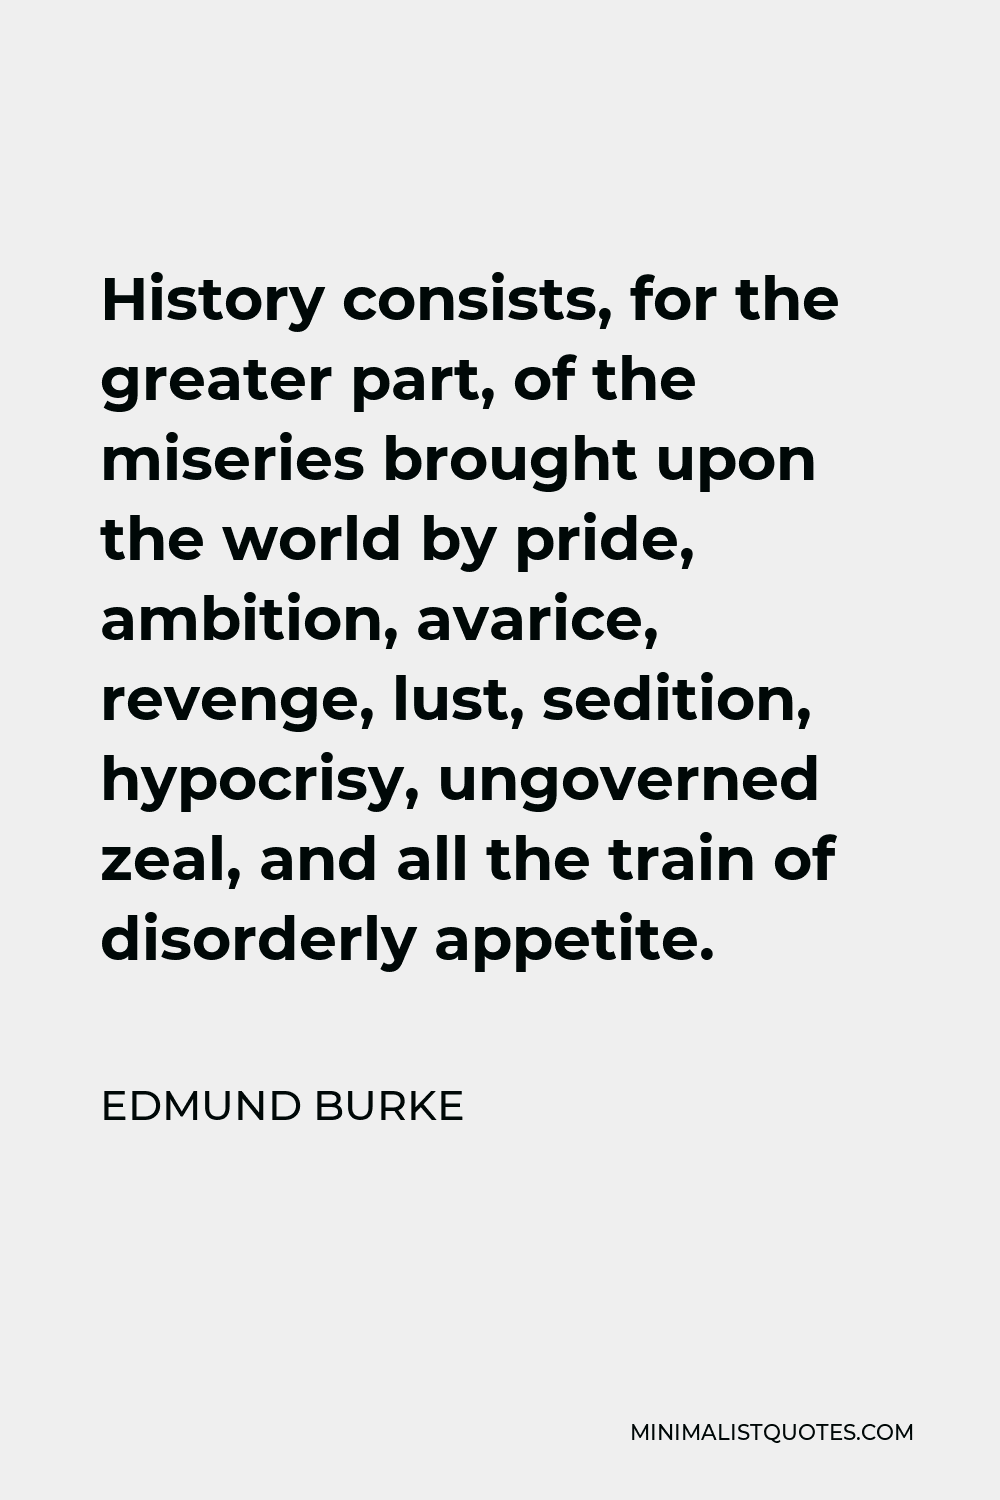 Edmund Burke Quote - History consists, for the greater part, of the miseries brought upon the world by pride, ambition, avarice, revenge, lust, sedition, hypocrisy, ungoverned zeal, and all the train of disorderly appetite.